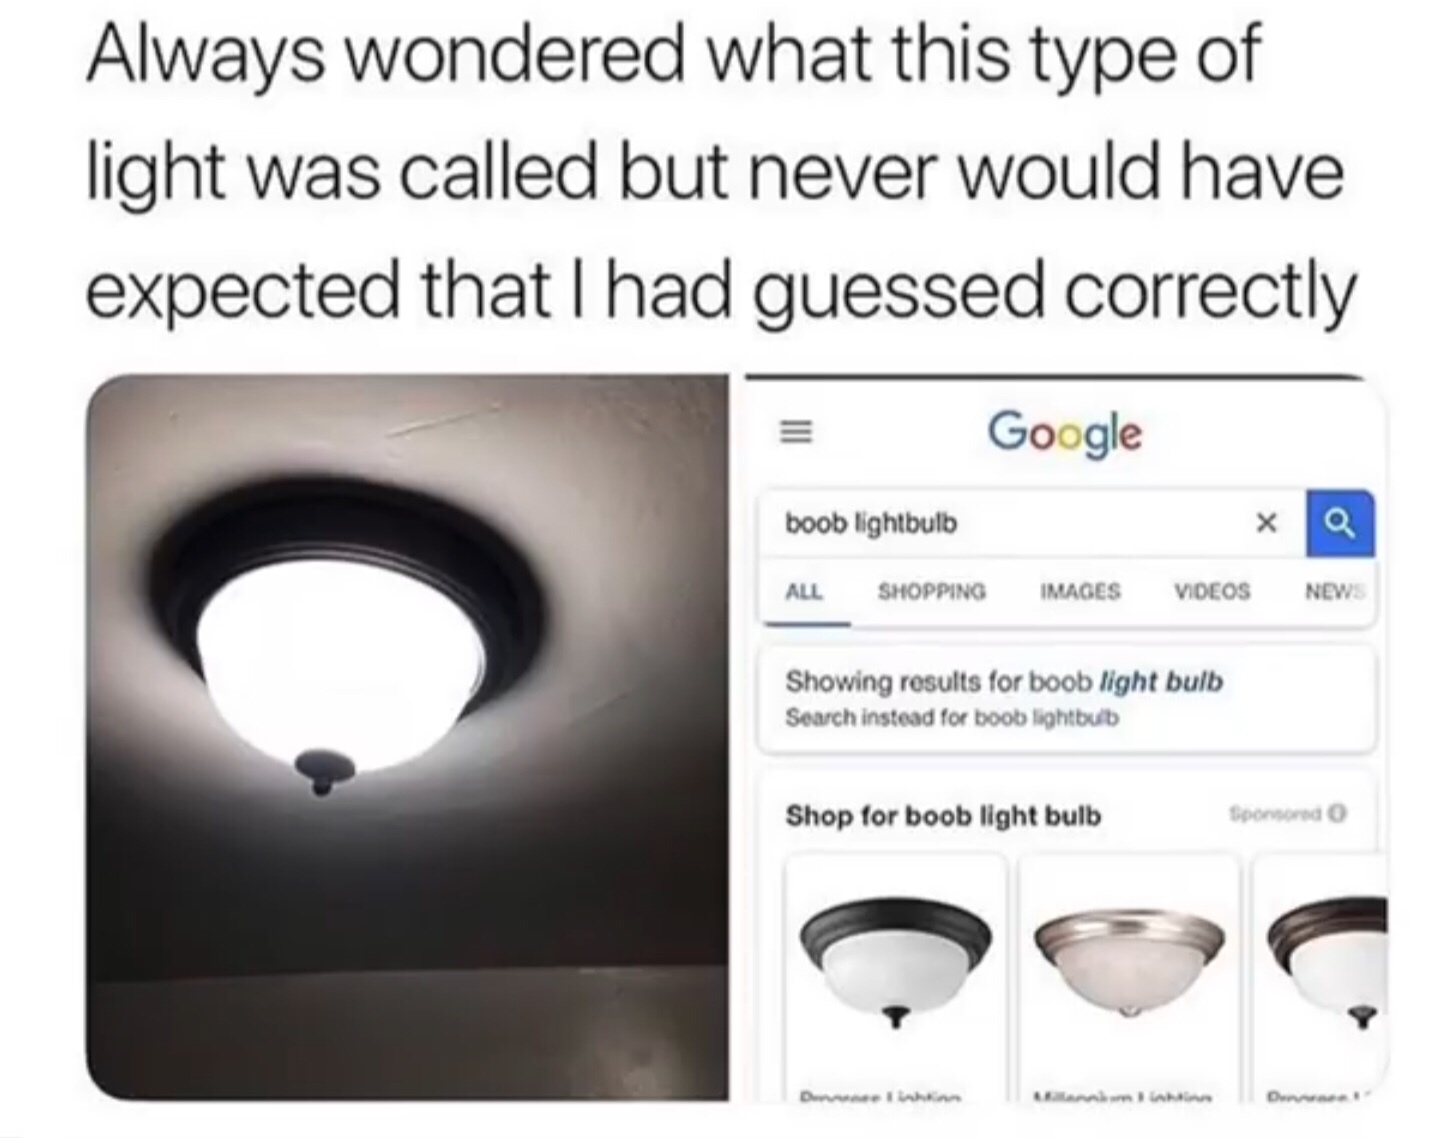 memes - boob lights meme - Always wondered what this type of light was called but never would have expected that I had guessed correctly Google boob lightbulb All Shopping Images Videos News Showing results for boob light bulb Search instead for boob ligh